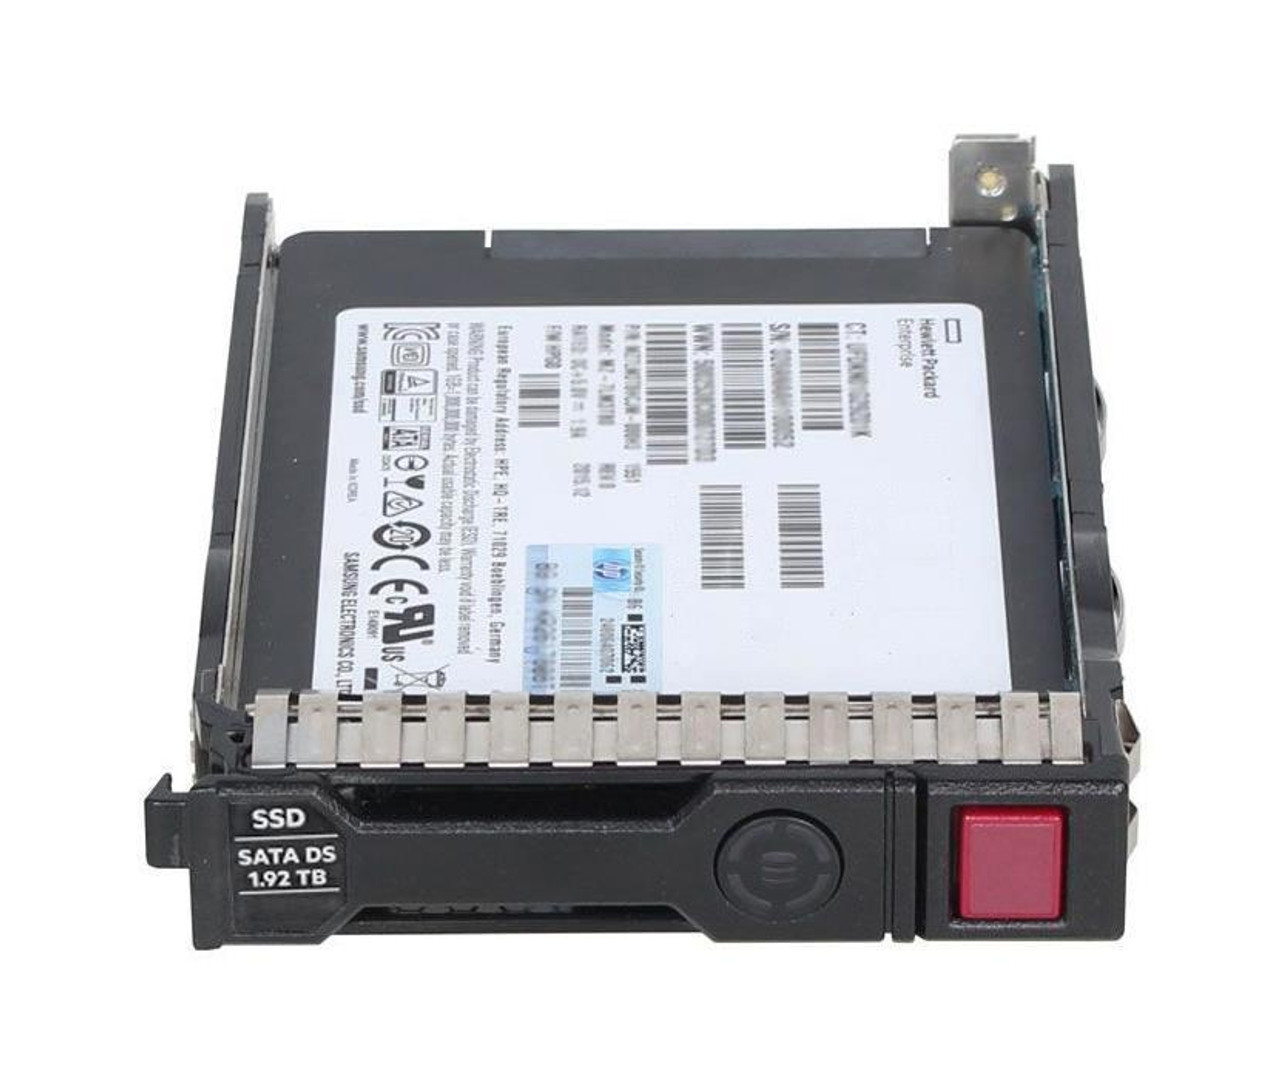 P09722-H21#0D1 HPE 1.92TB SATA 6Gbps Mixed Use 2.5-inch Internal Solid State Drive (SSD) with Smart Carrier